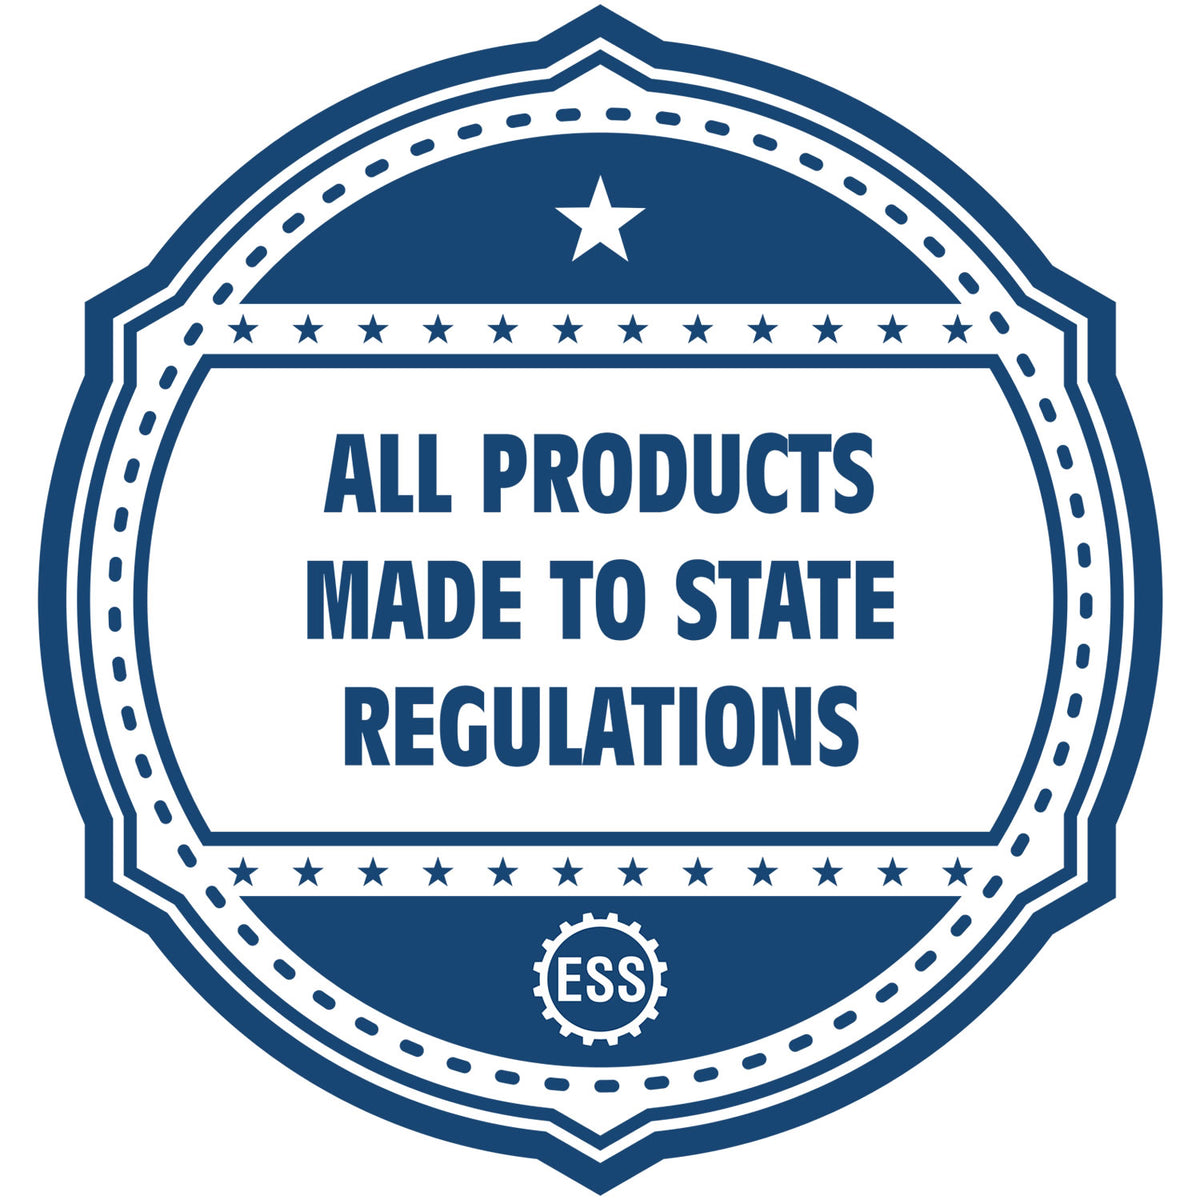 A blue icon or badge for the Hybrid Georgia Landscape Architect Seal showing that this product is made in compliance with state regulations.